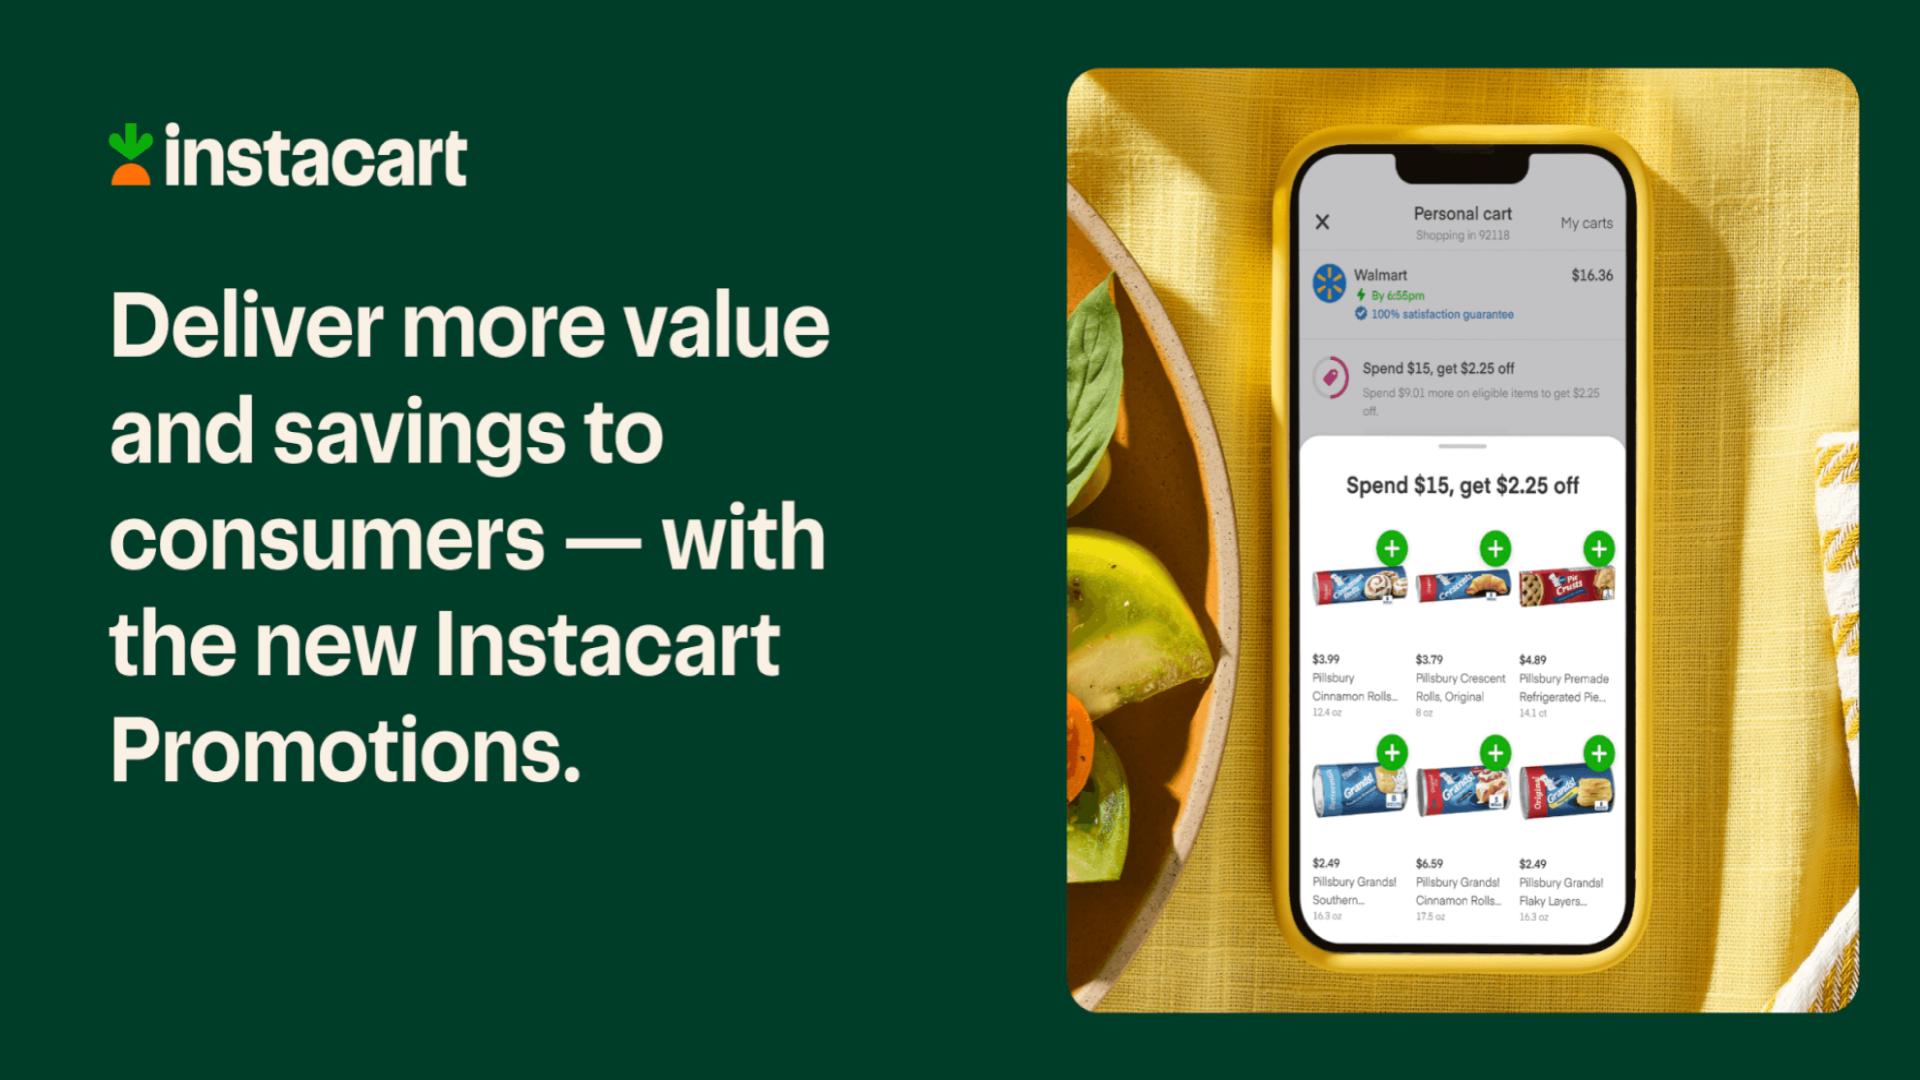 Example of Instacart Promotions